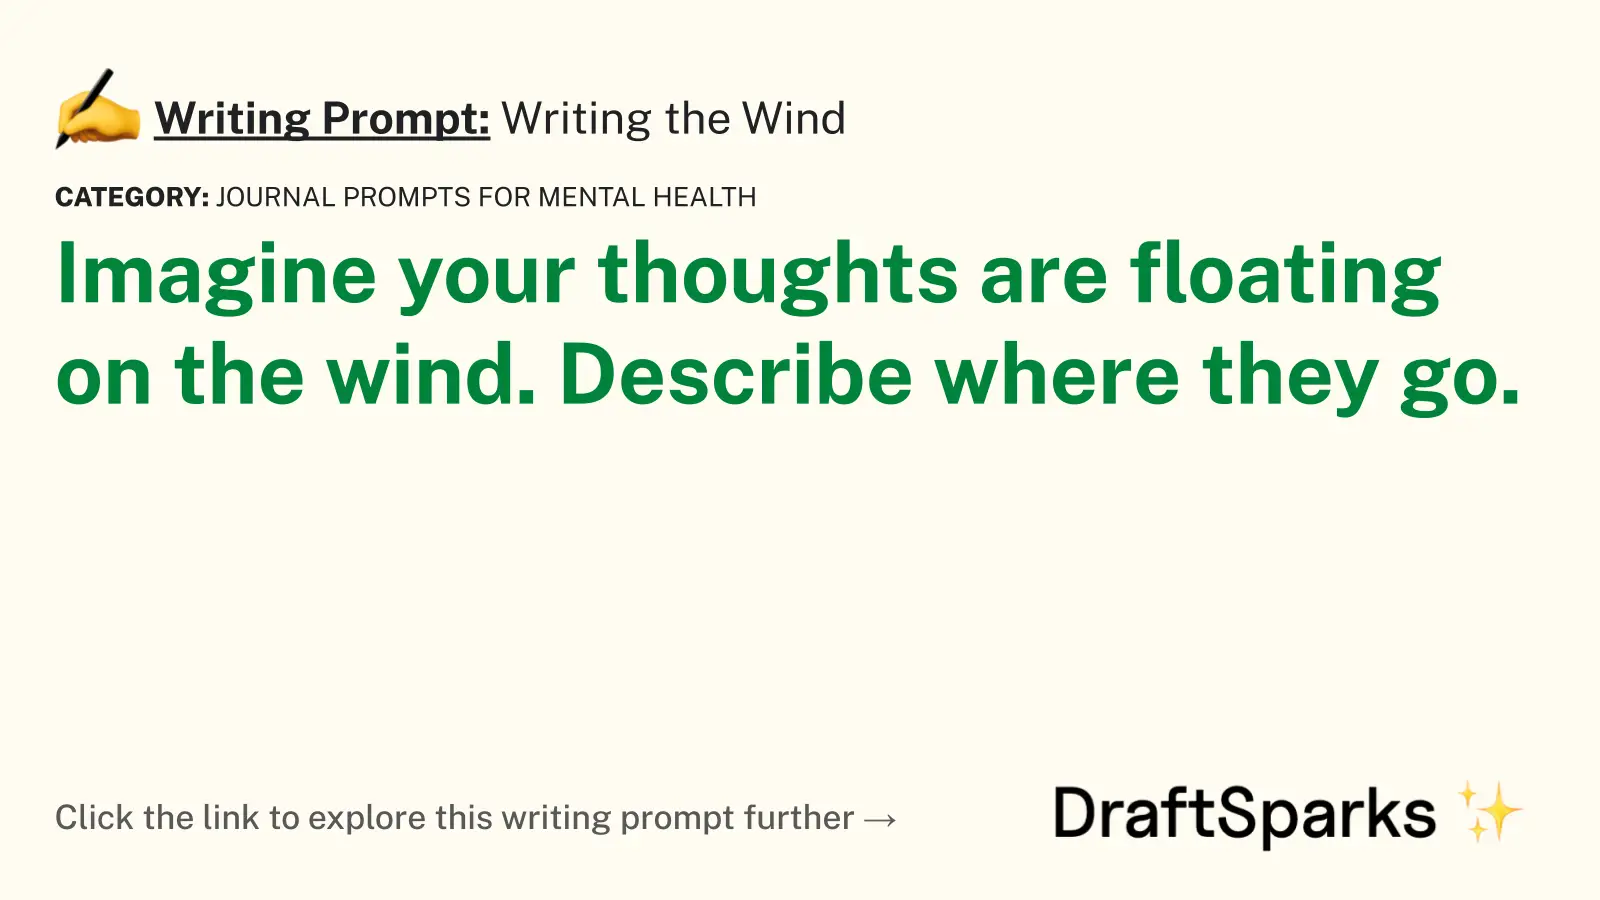 Writing the Wind